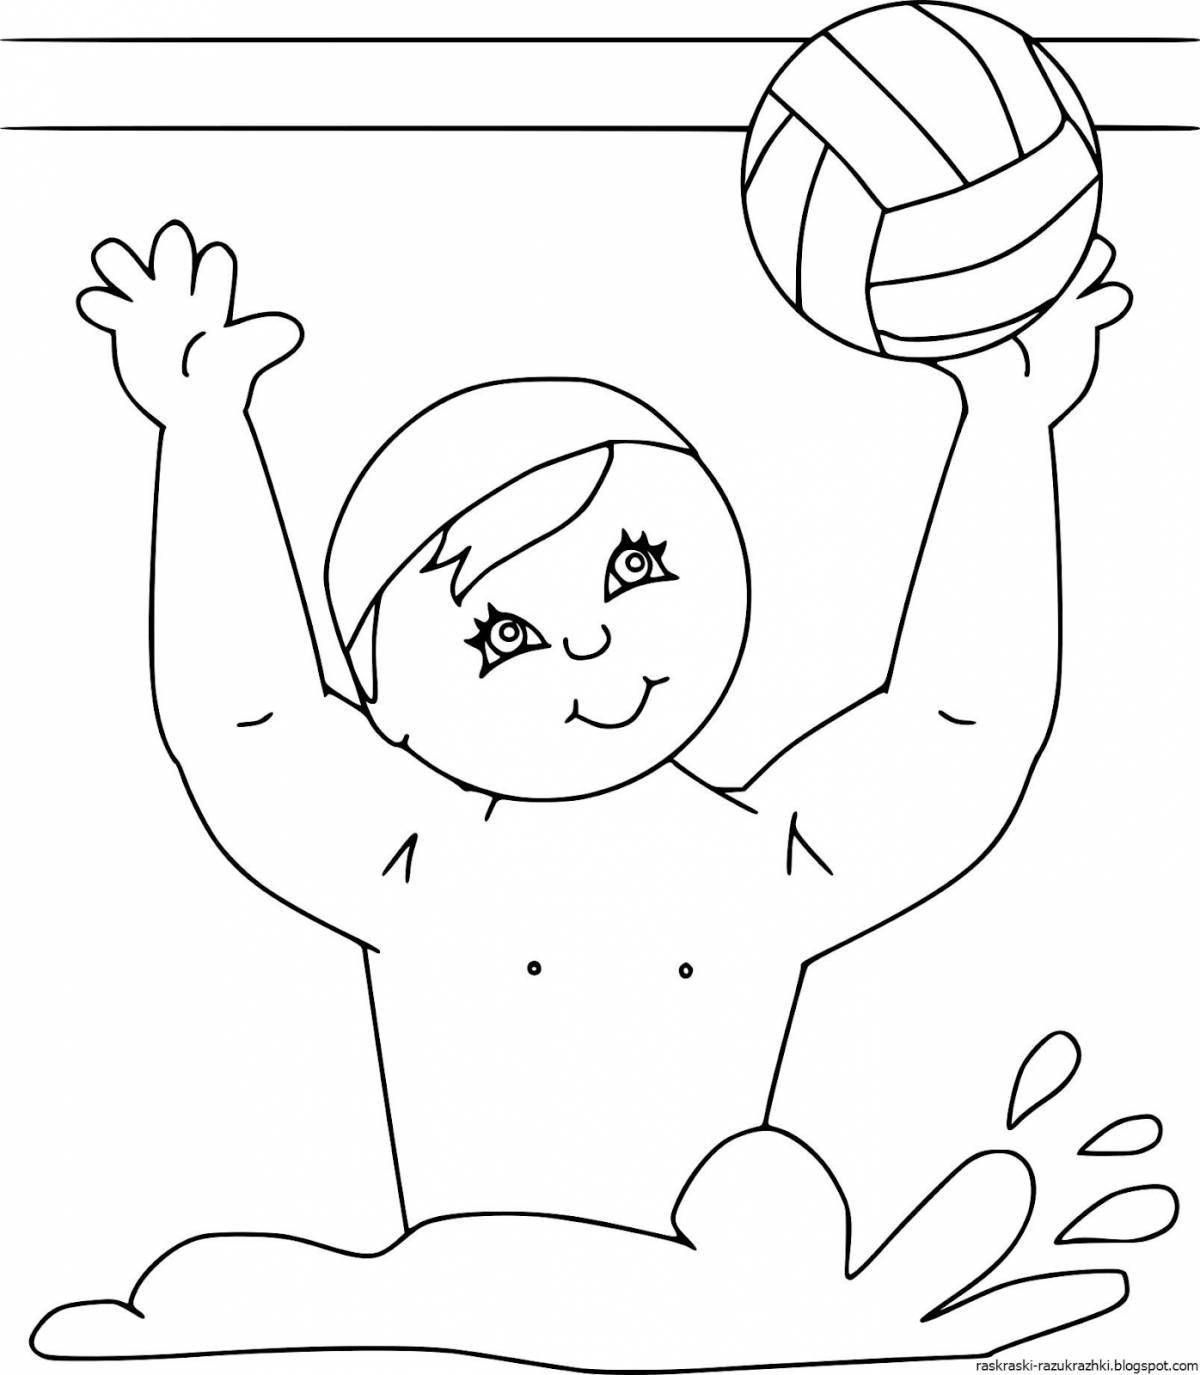 Dynamic summer sports coloring page